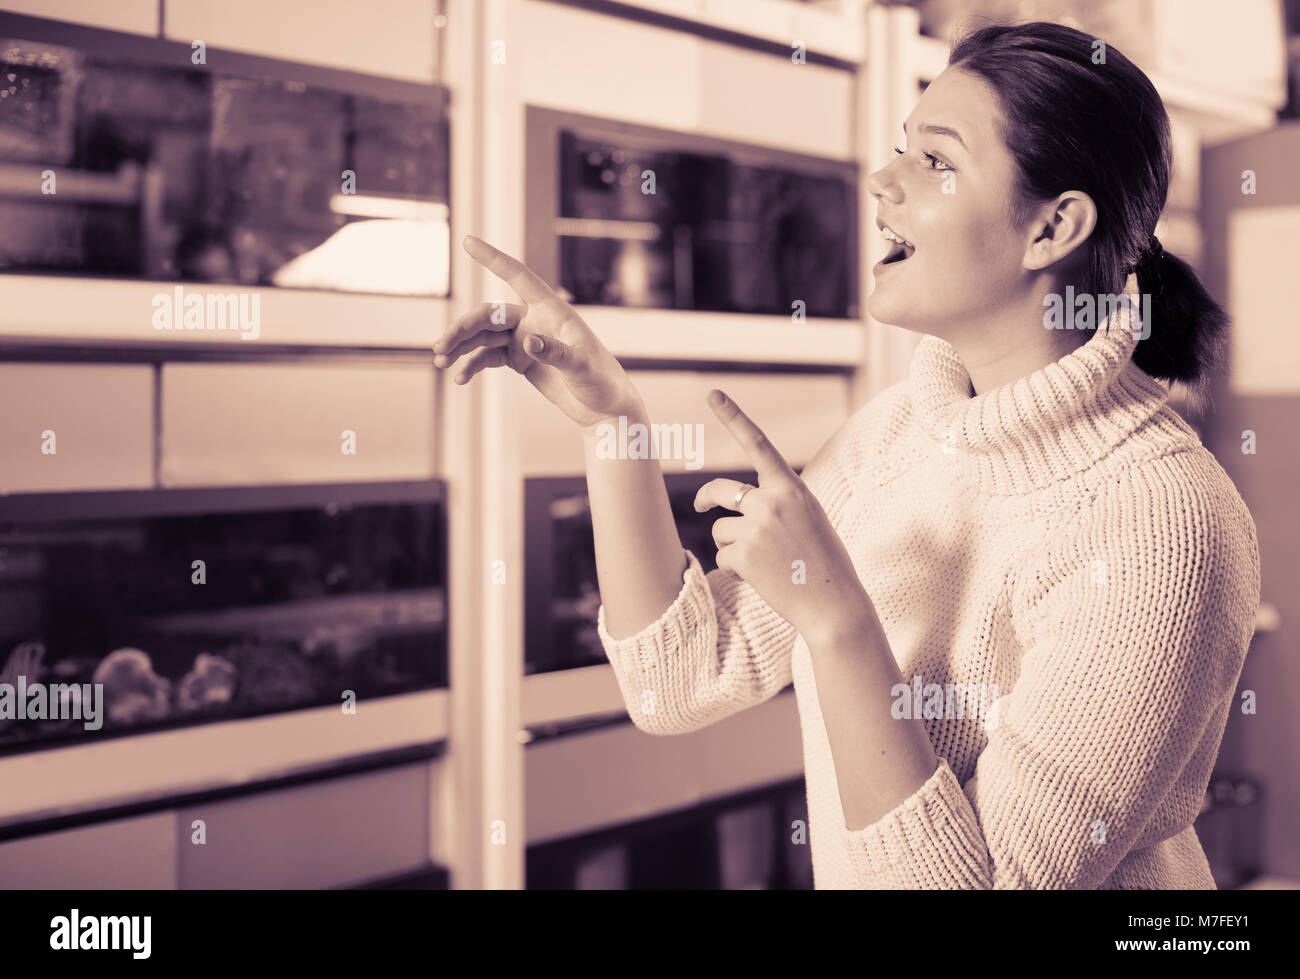 Teenage girl in aquarium shop is looking at different colored fish on several rows of shelves with aquariums. Stock Photo